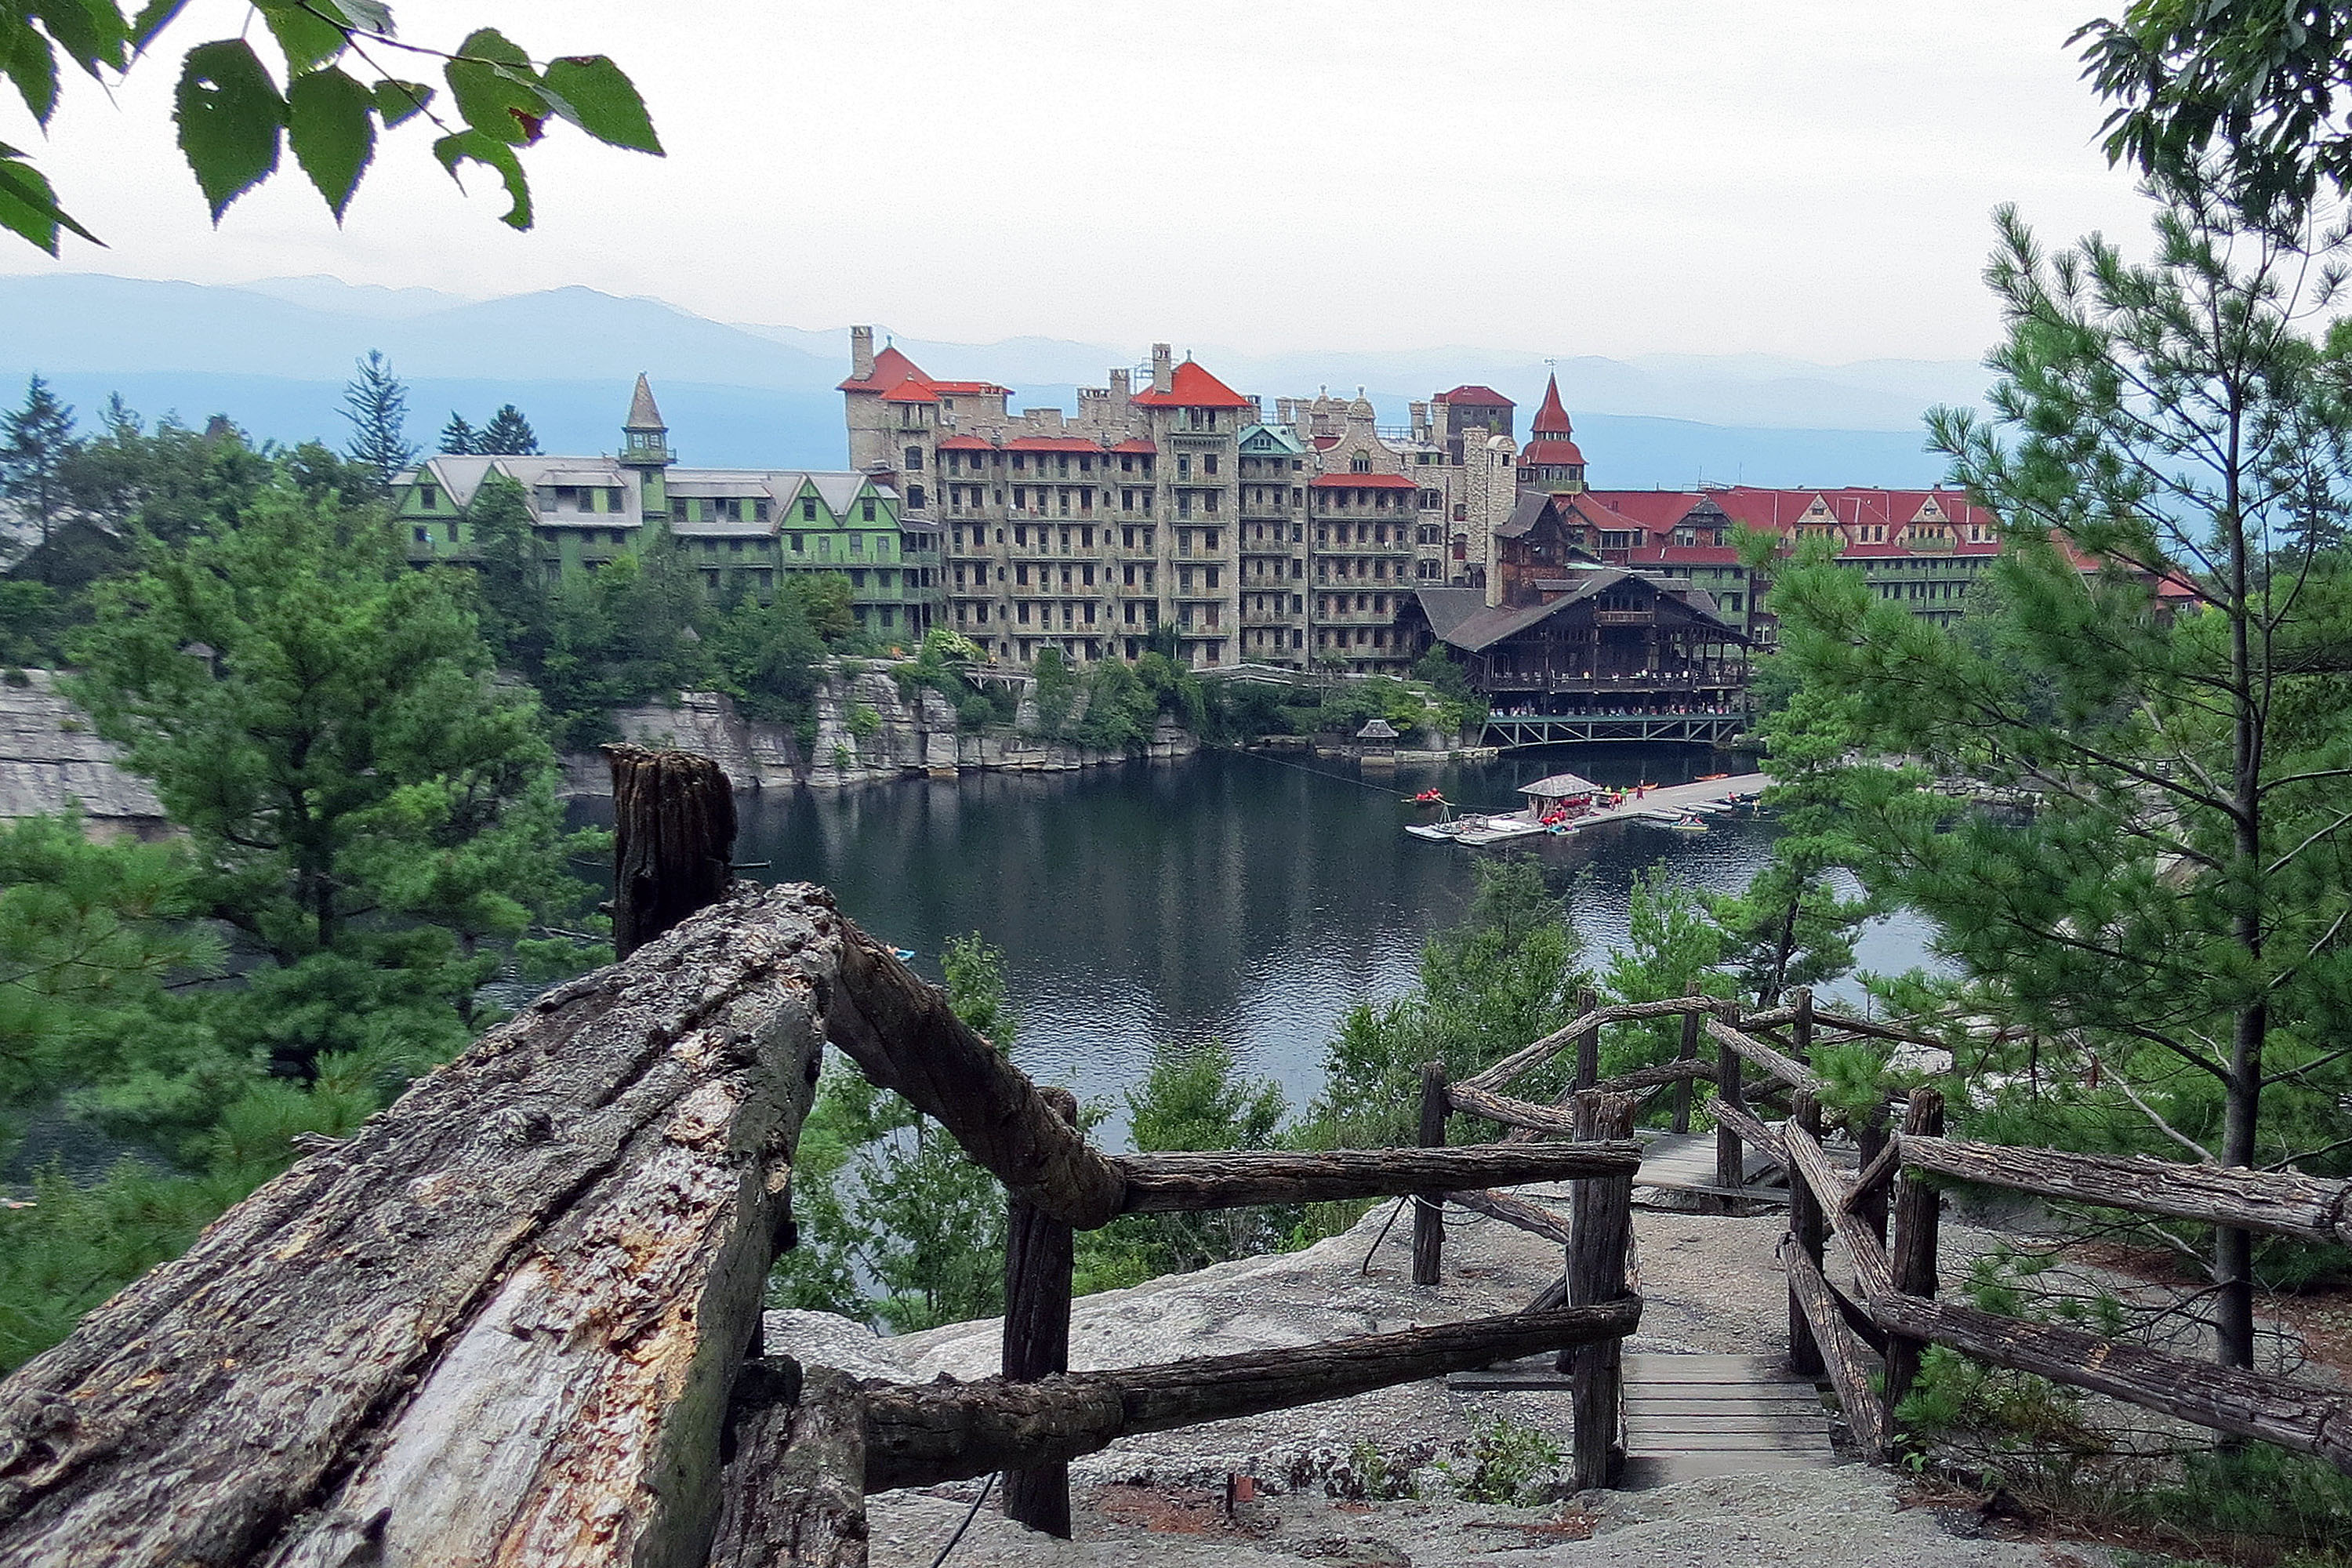 Mohonk mouintain house resort and mohonk lake photo